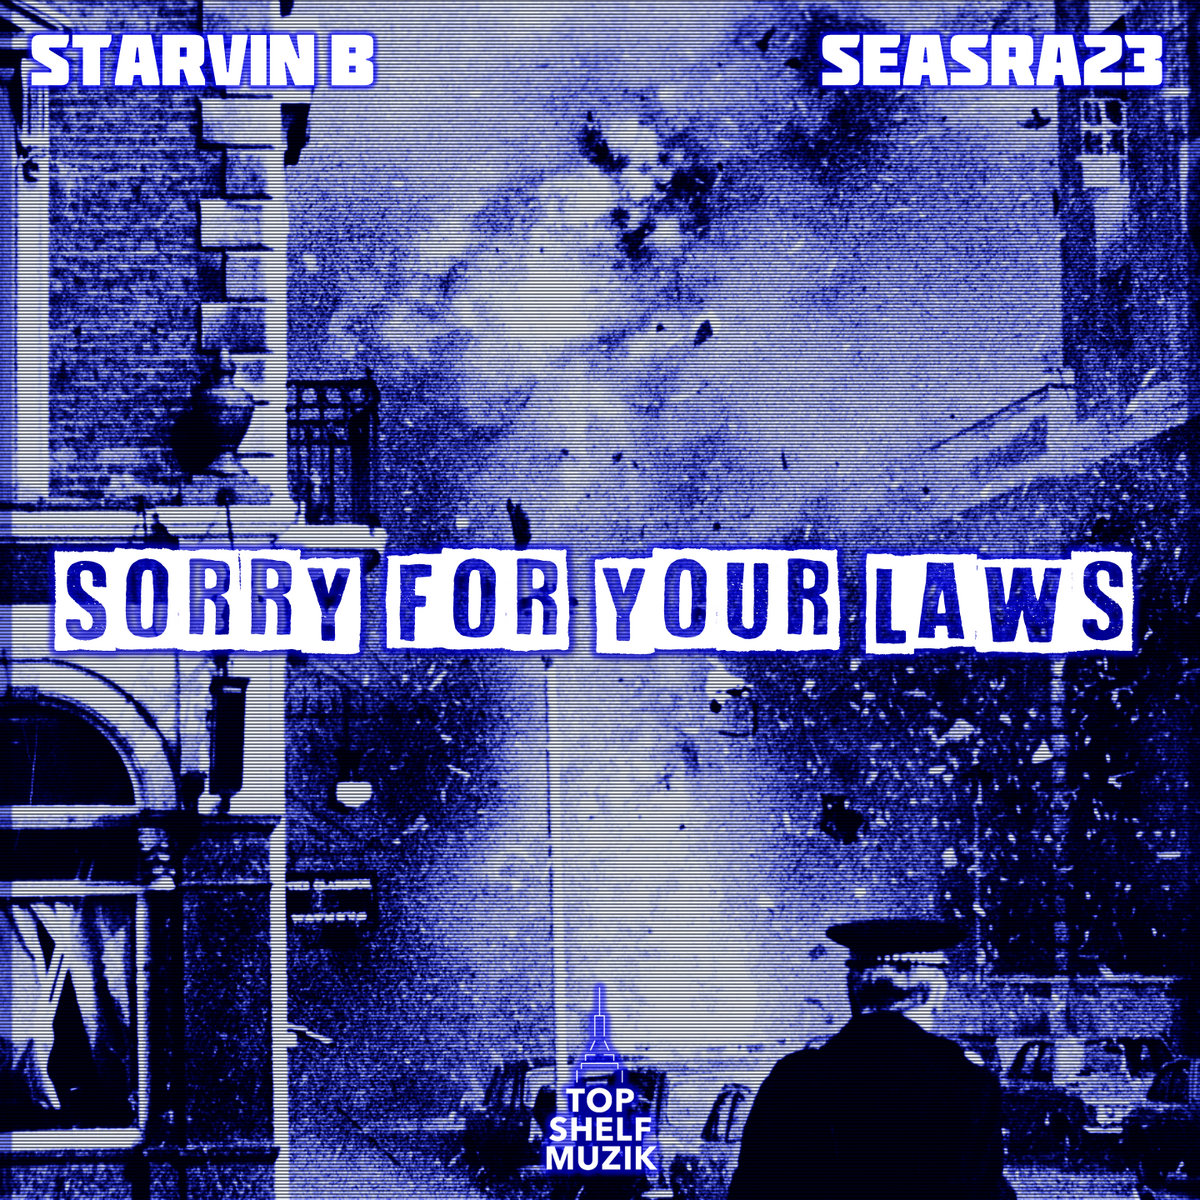 Sorry_for_your_laws_starvin_b